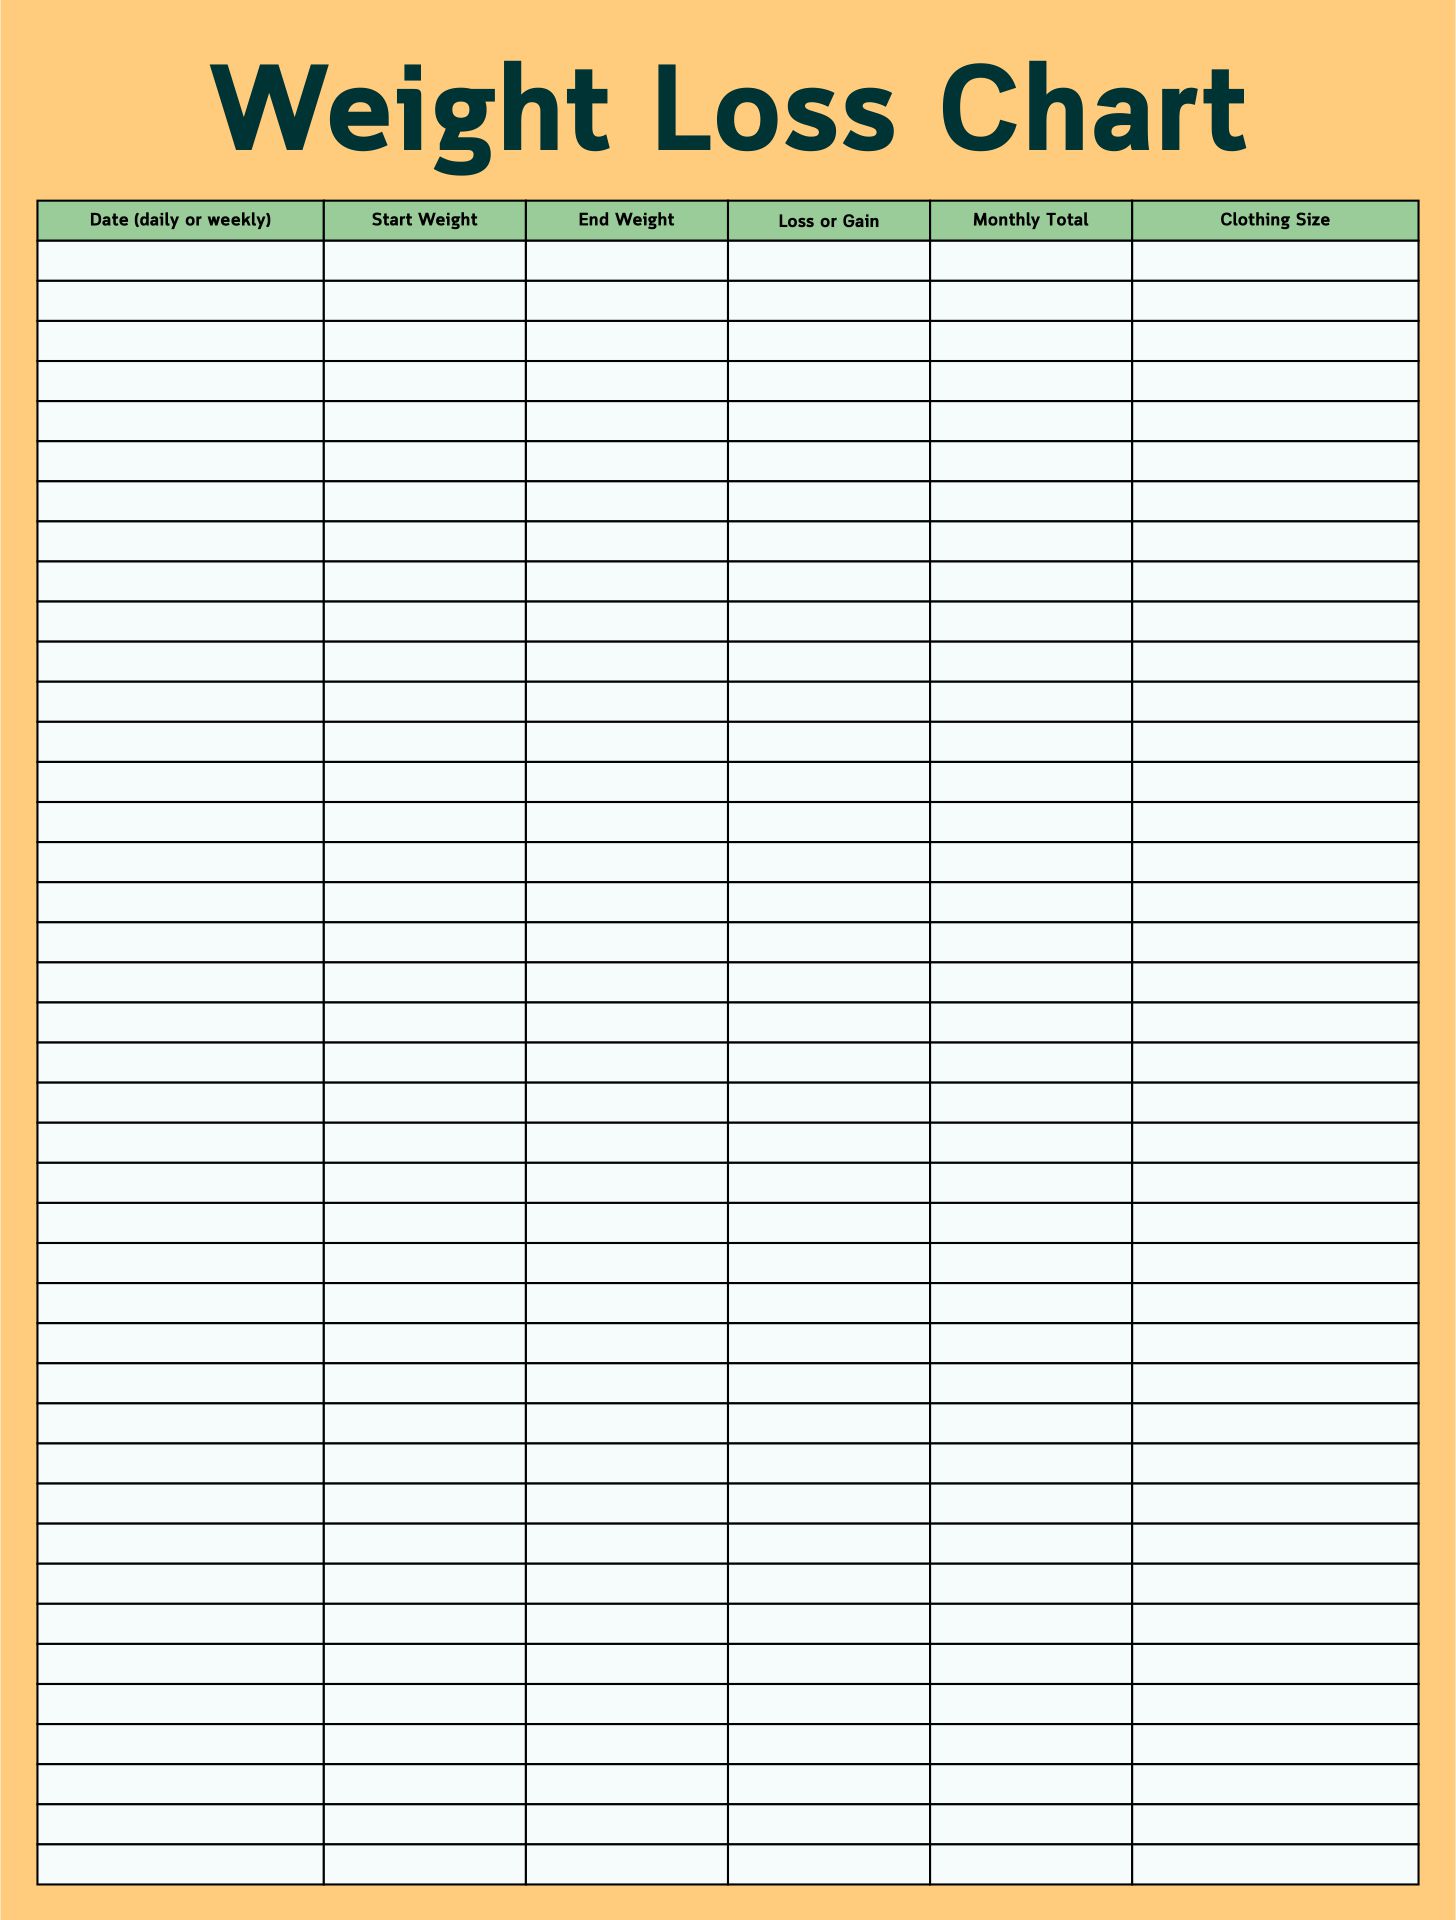 weight-loss-tracker-printable-template